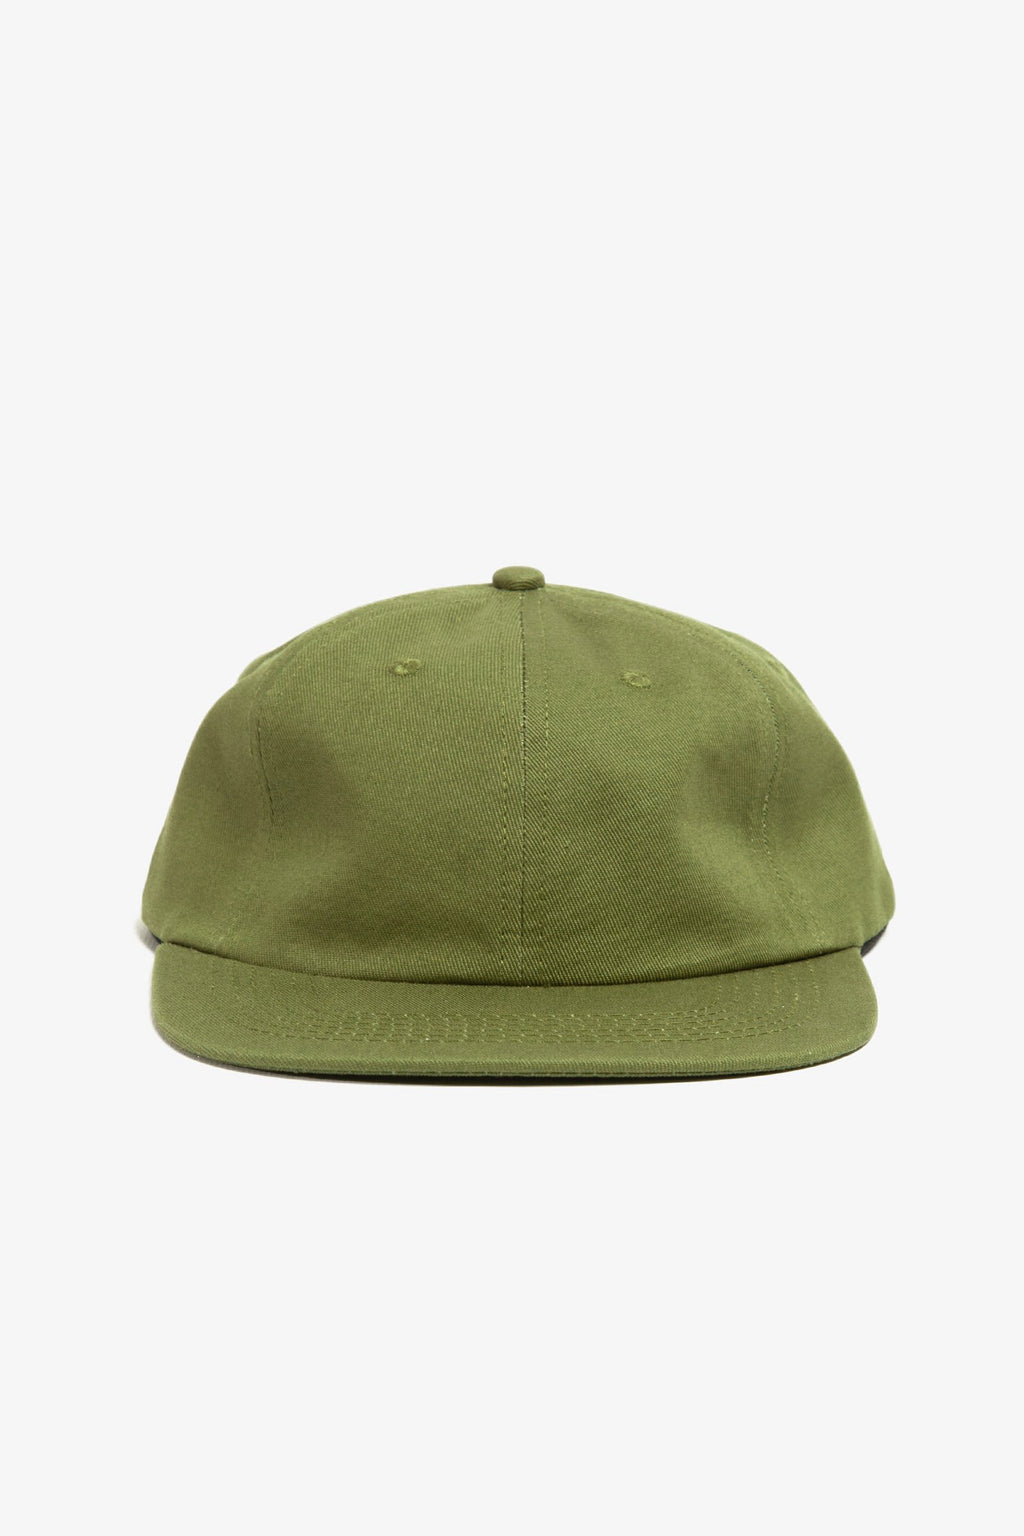 Power House - Perfect 6-Panel Cap - Olive